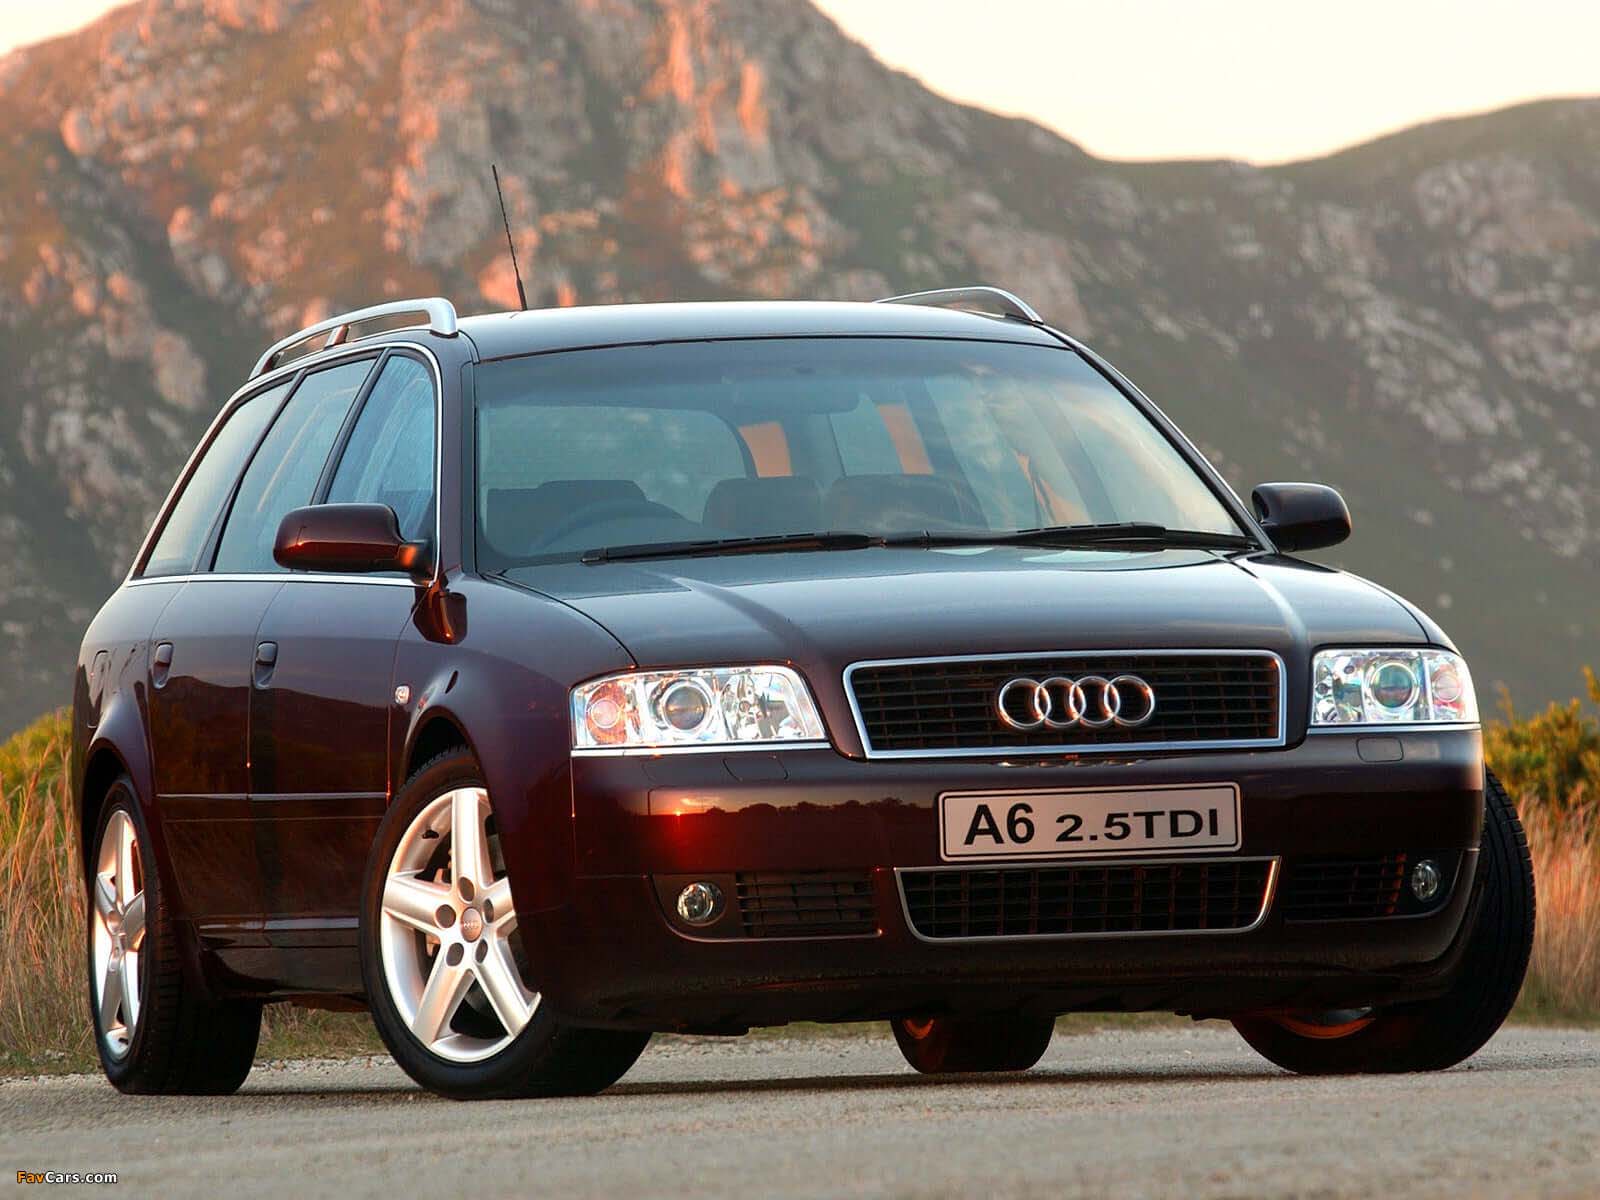 The ultimate Audi A6 C5 headlights page and how to convert to bi-xenon